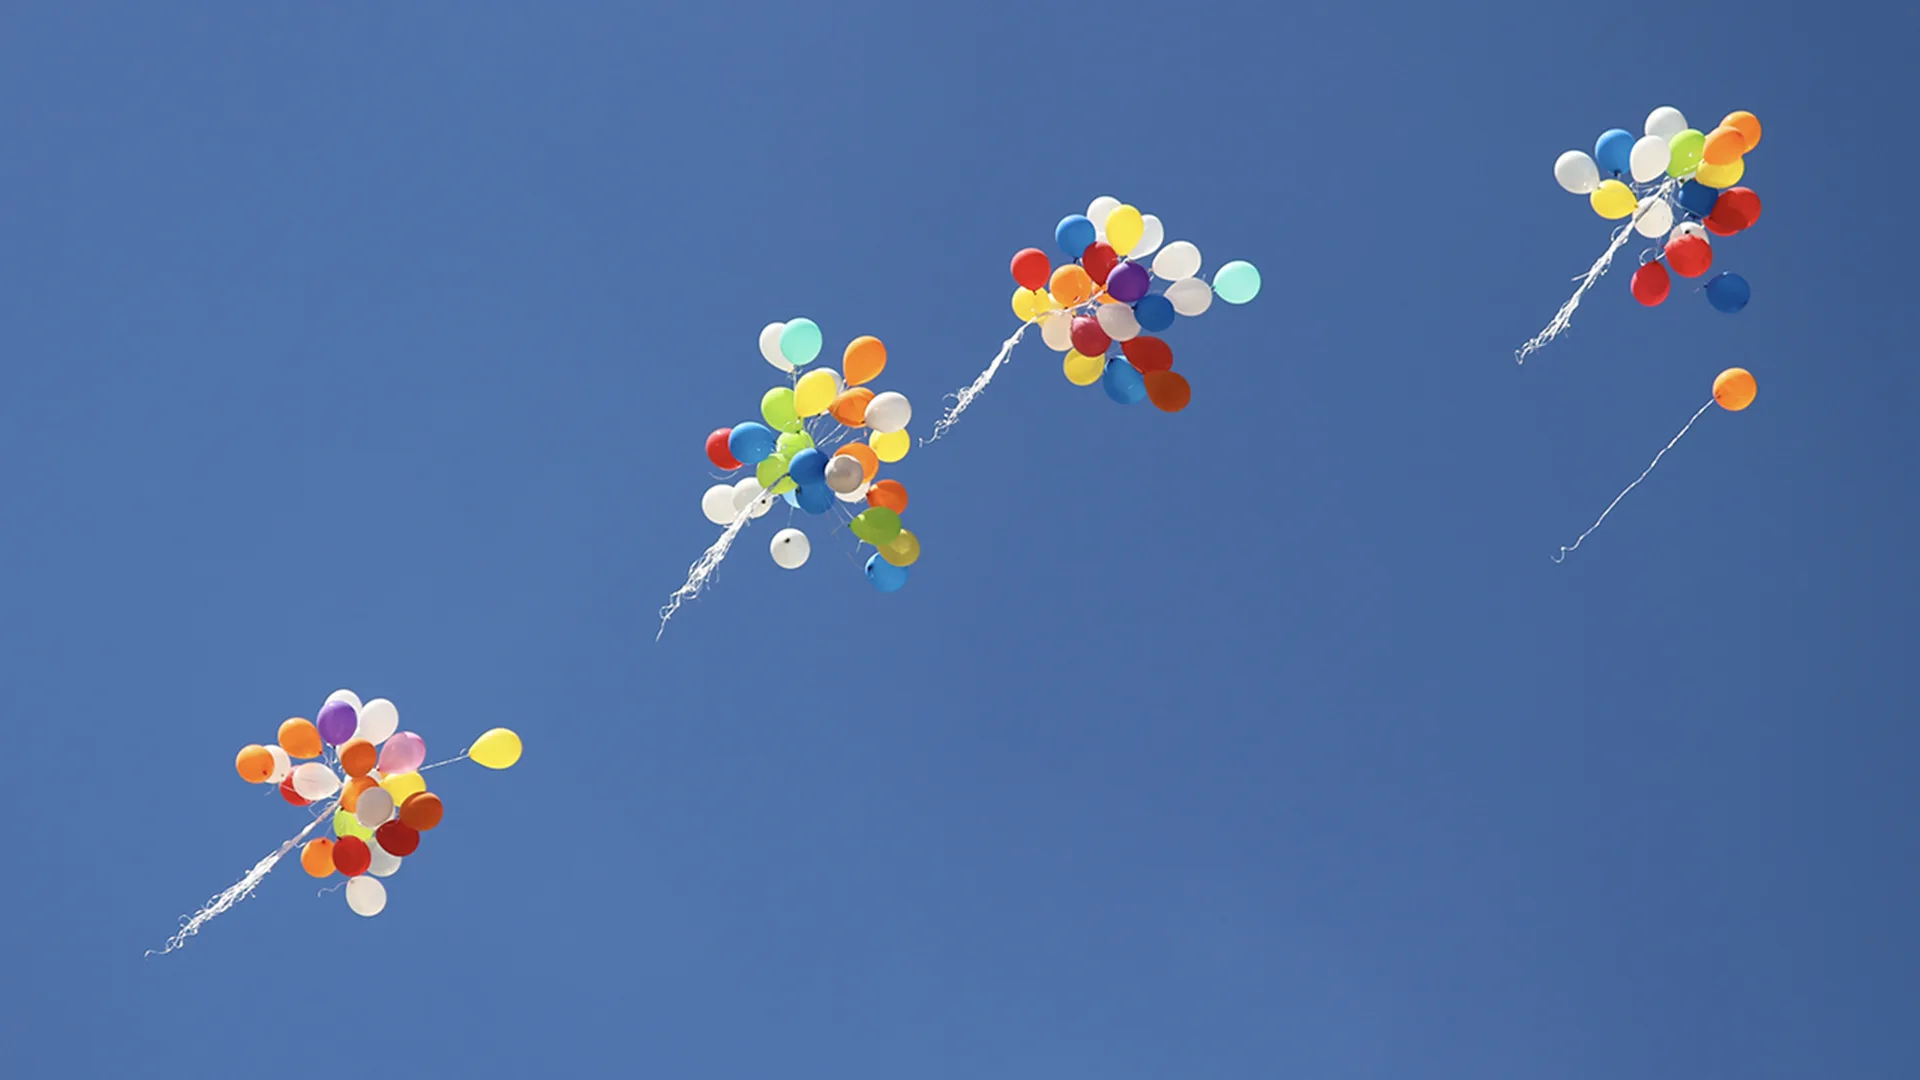 Balloons floating in the sky